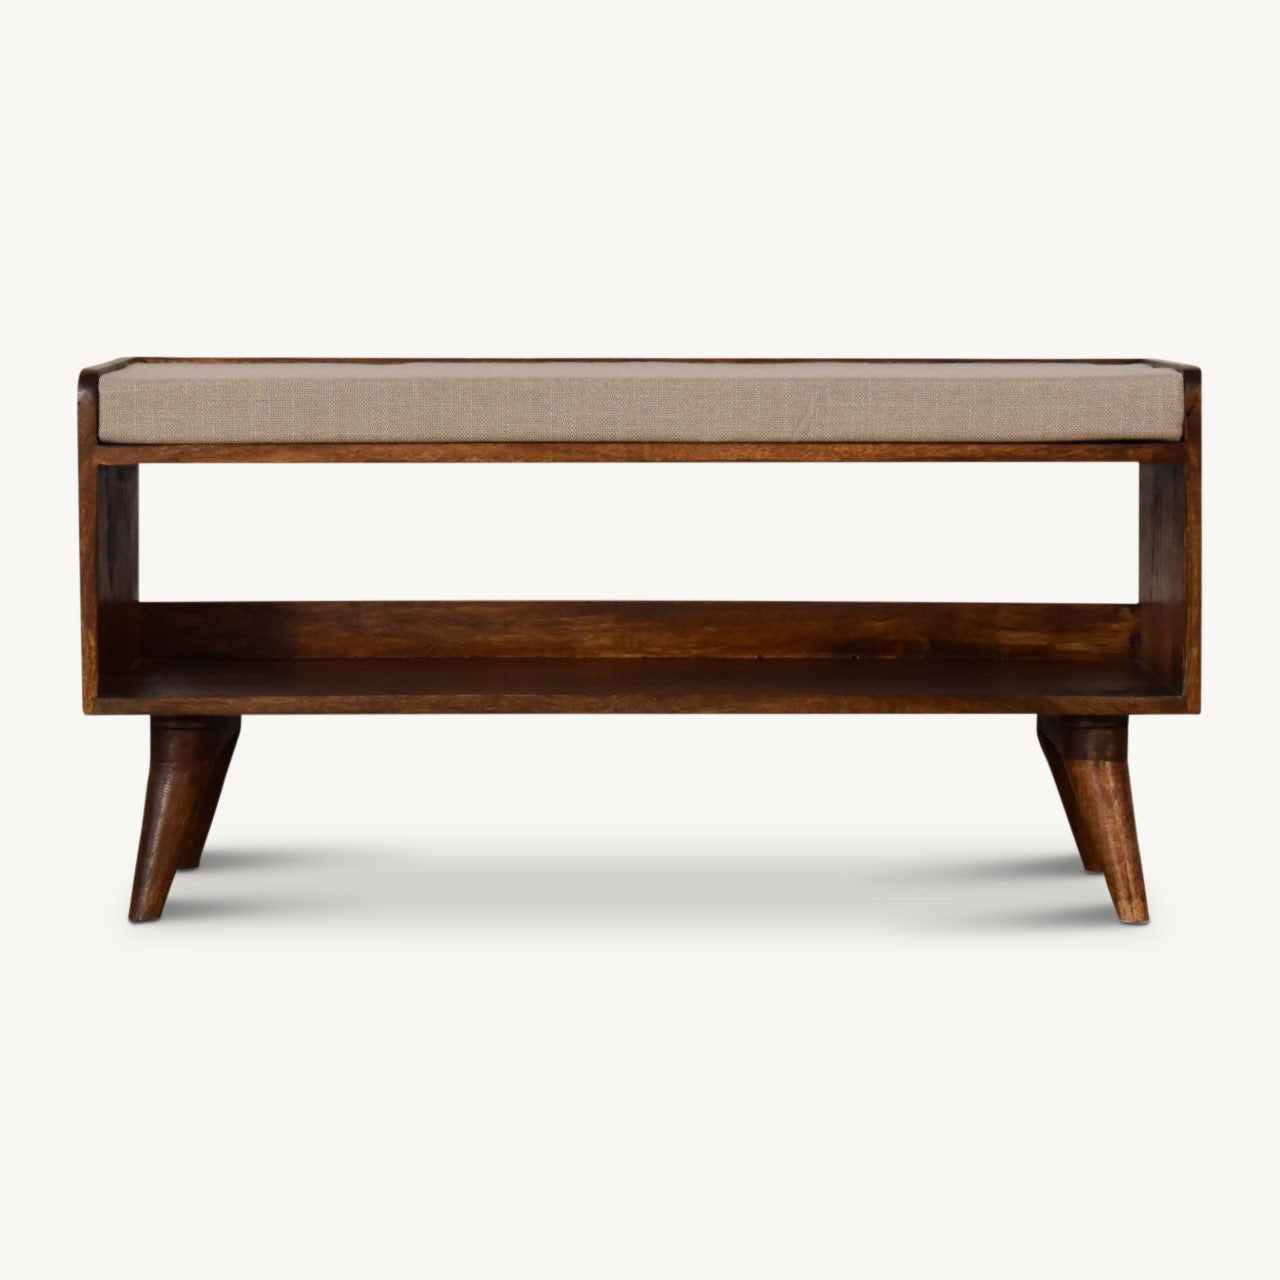 Nordic storage bench with upholstered seat